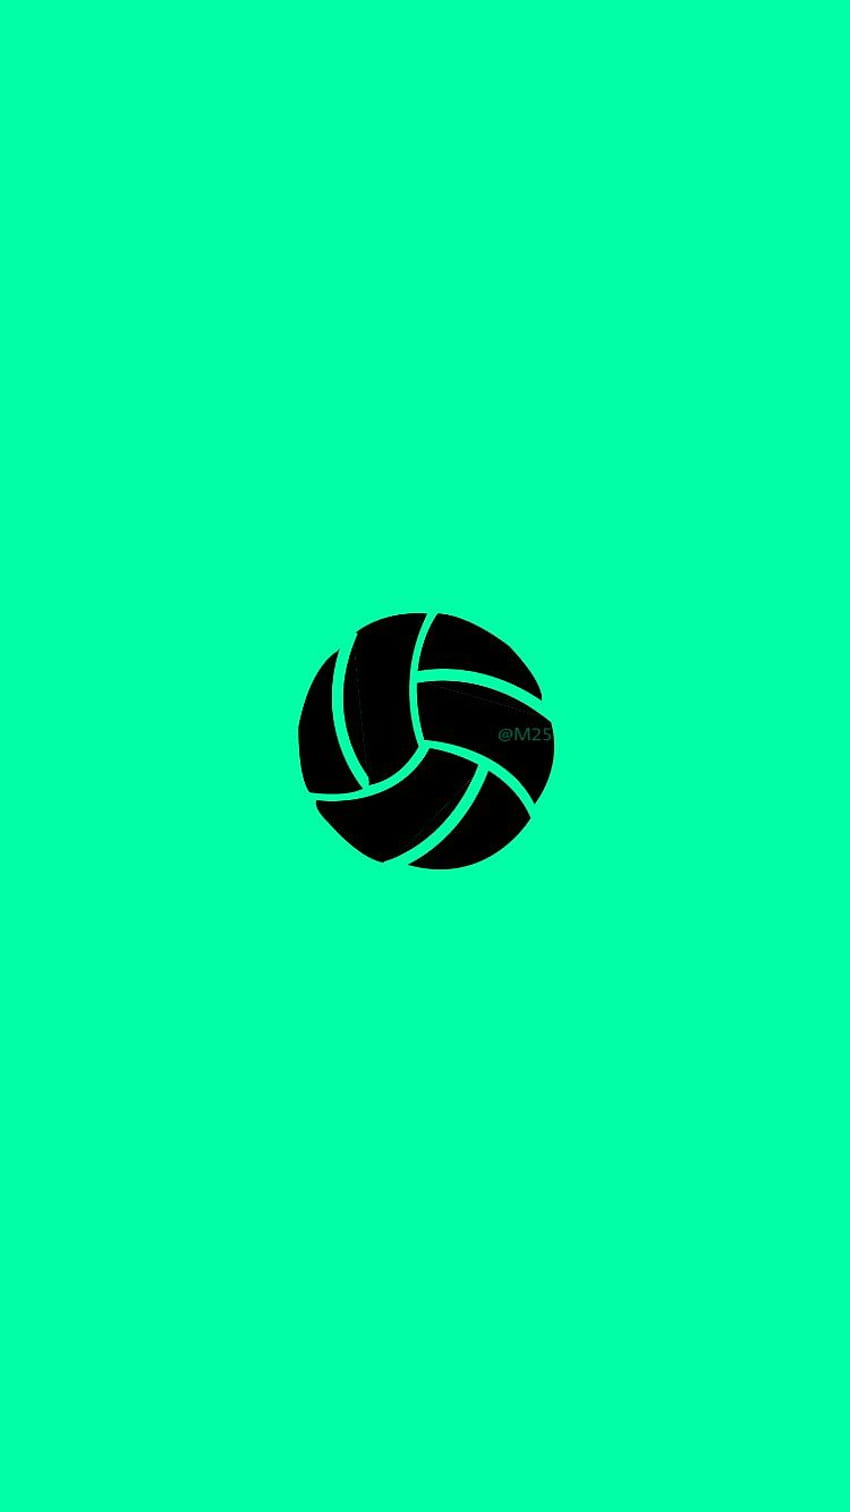 A volleyball logo on green background - Volleyball